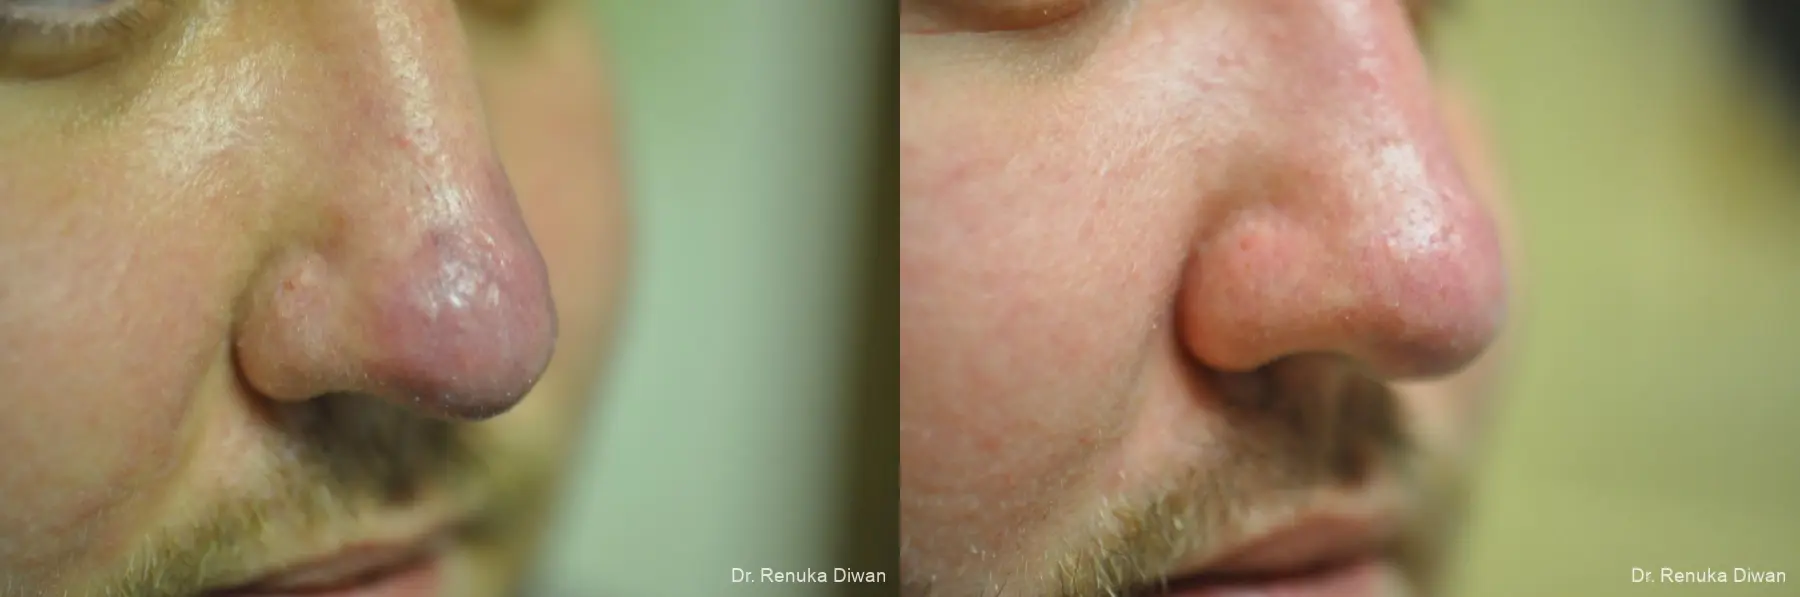 Laser-for-veins-and-redness-for-men: Patient 9 - Before and After  